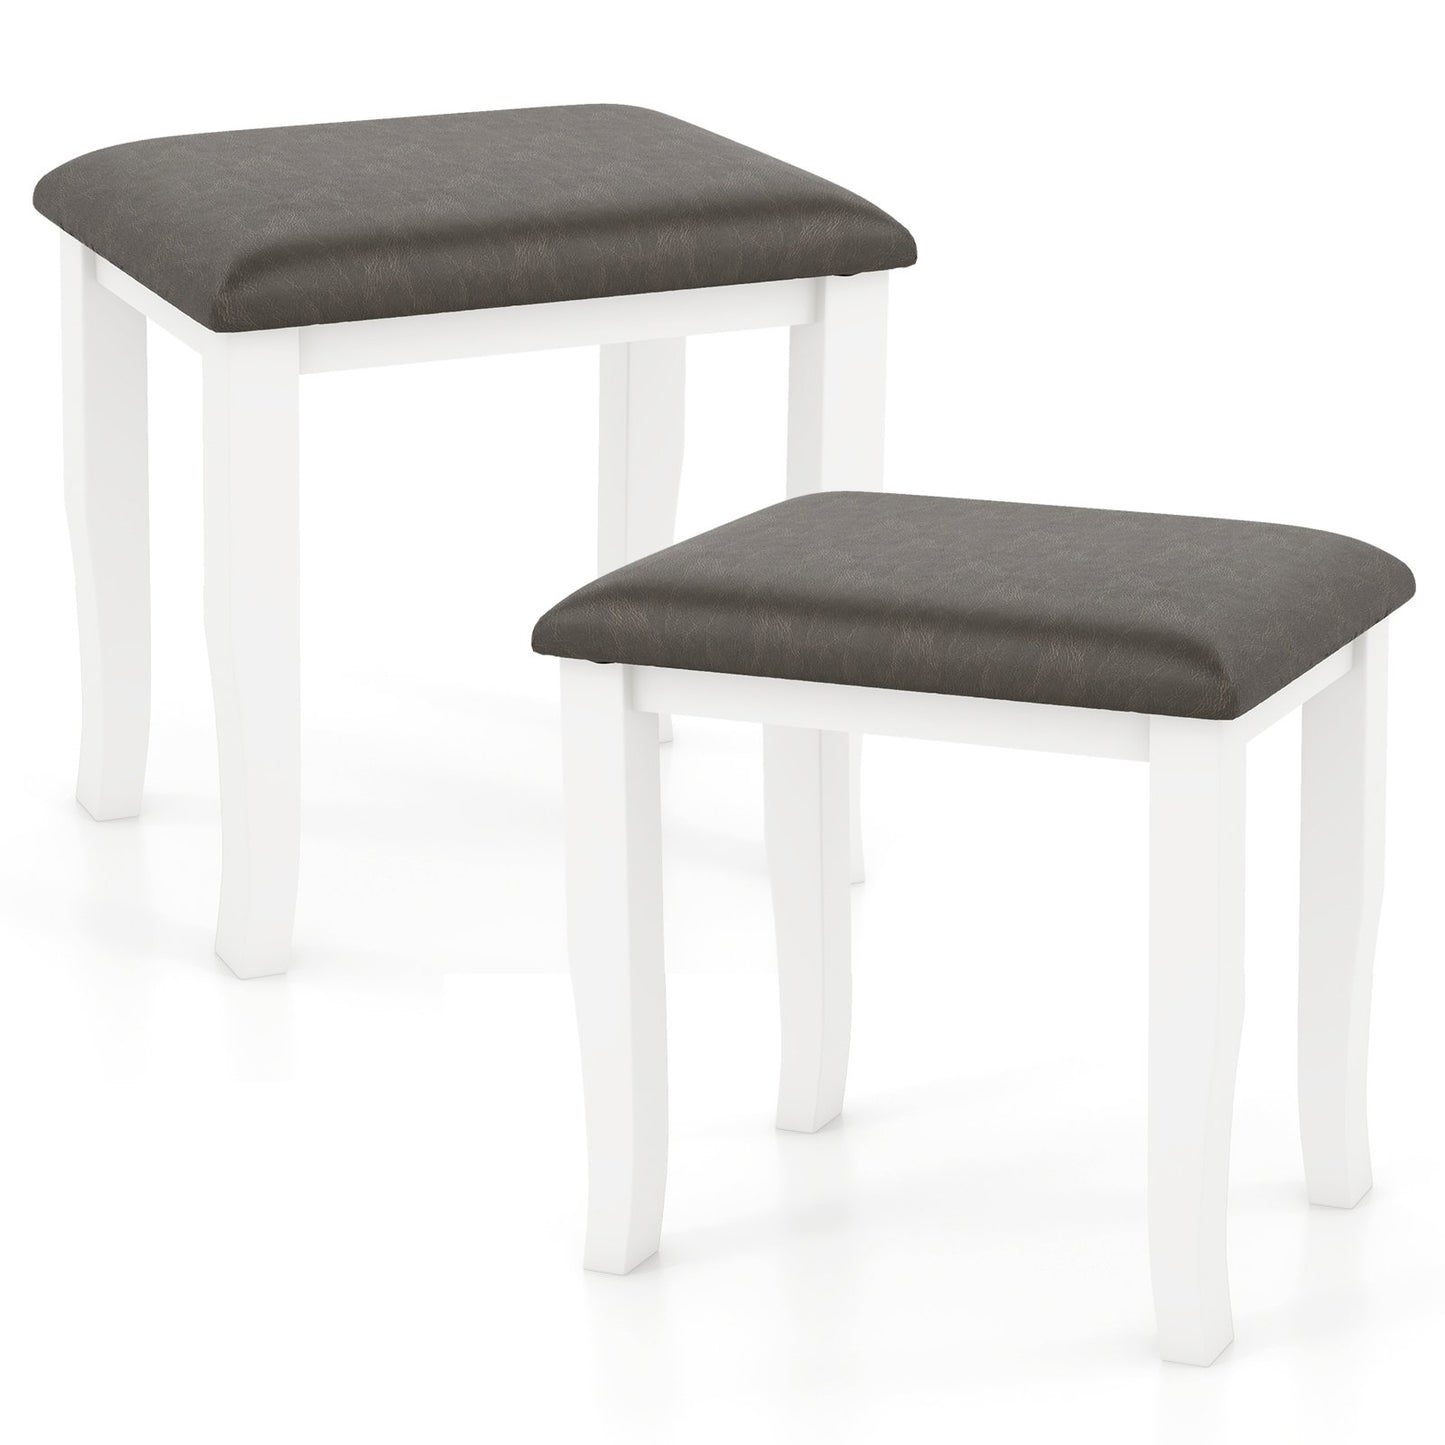 Faux Leather Vanity Stool Chair Set of 2 for Makeup Room and Living Room-Gray and White, Gray & White